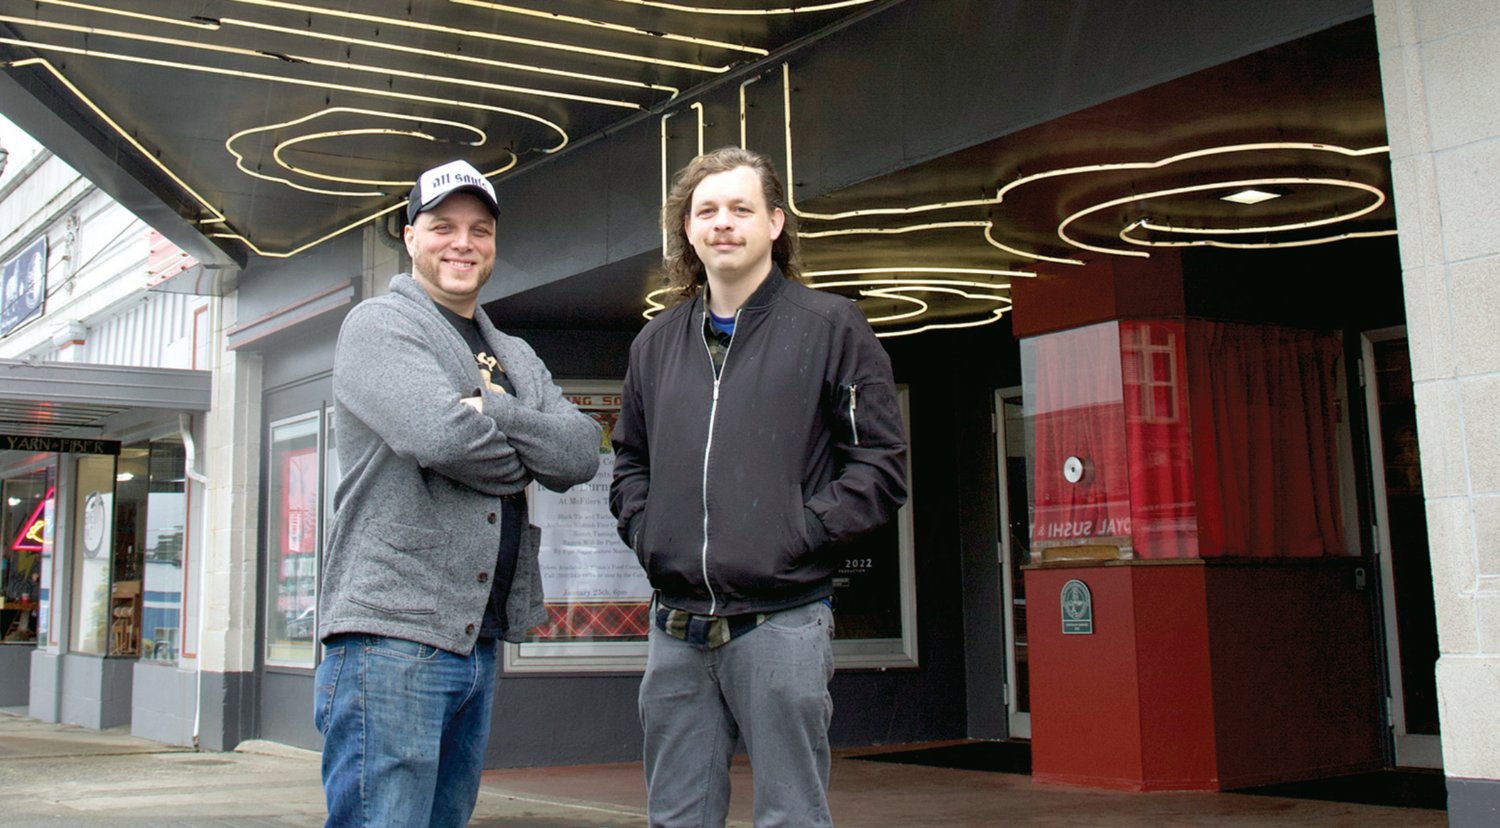 McFiler’s Chehalis Theater owner Tim Filer, left, and HUB Comedy producer Gabe Botten stand beneath a sign advertising Kabir Singh’s comedy show in Chehalis on Tuesday.